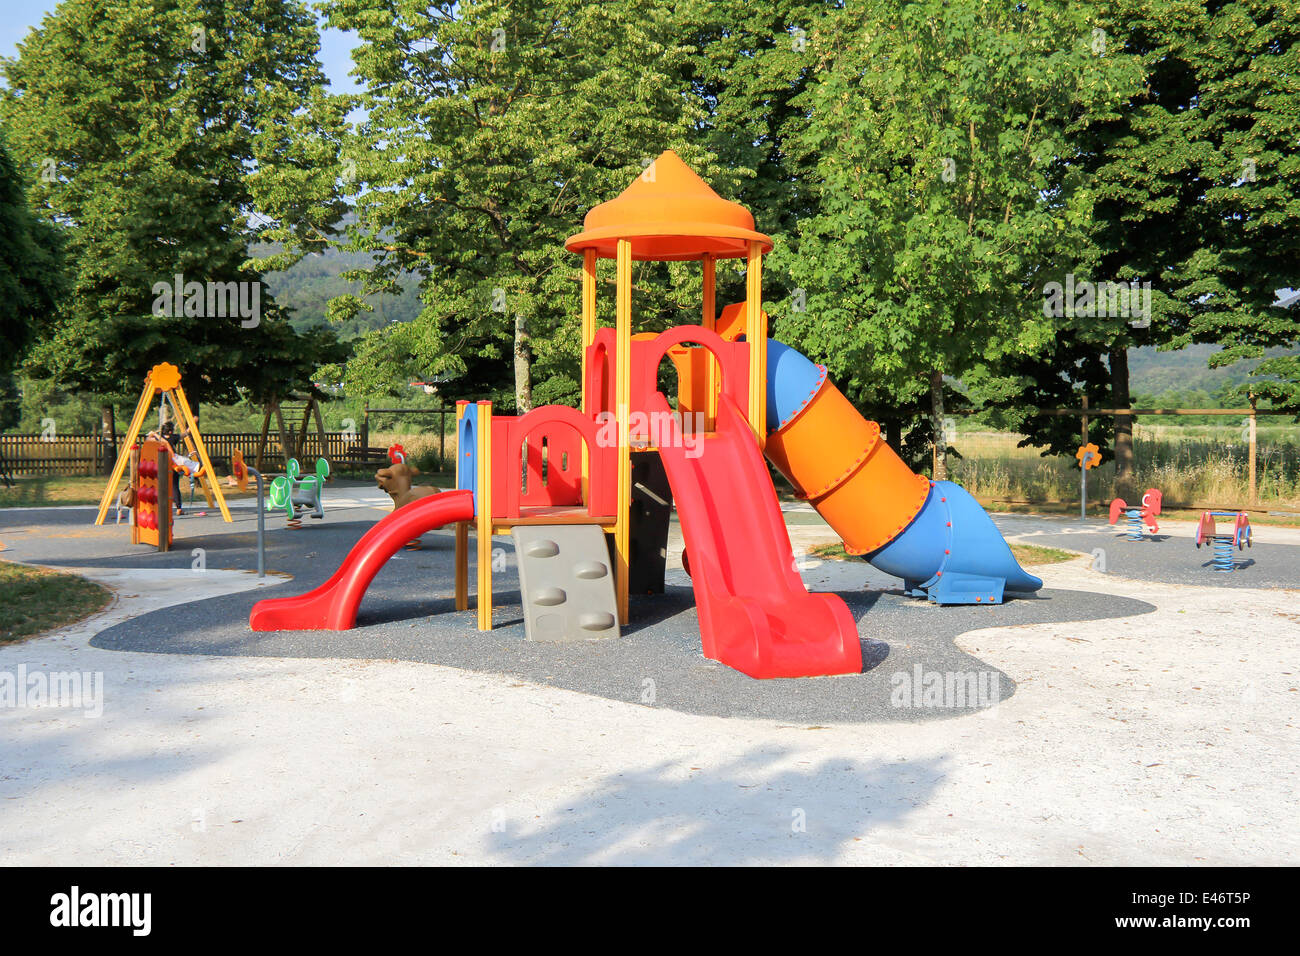 Children's school playground with slides and swings Stock Photo